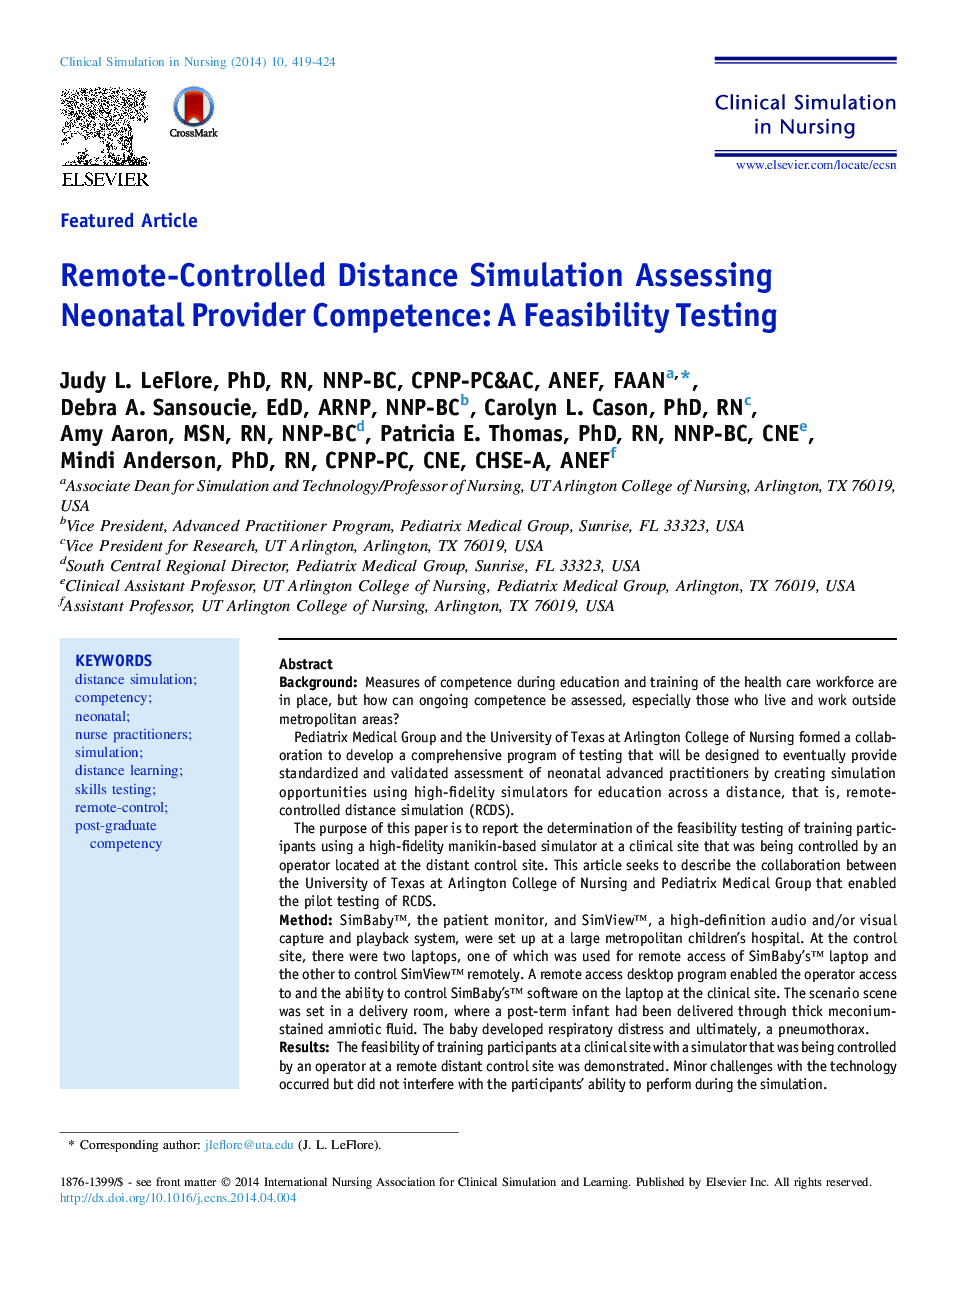 Remote-Controlled Distance Simulation Assessing Neonatal Provider Competence: A Feasibility Testing